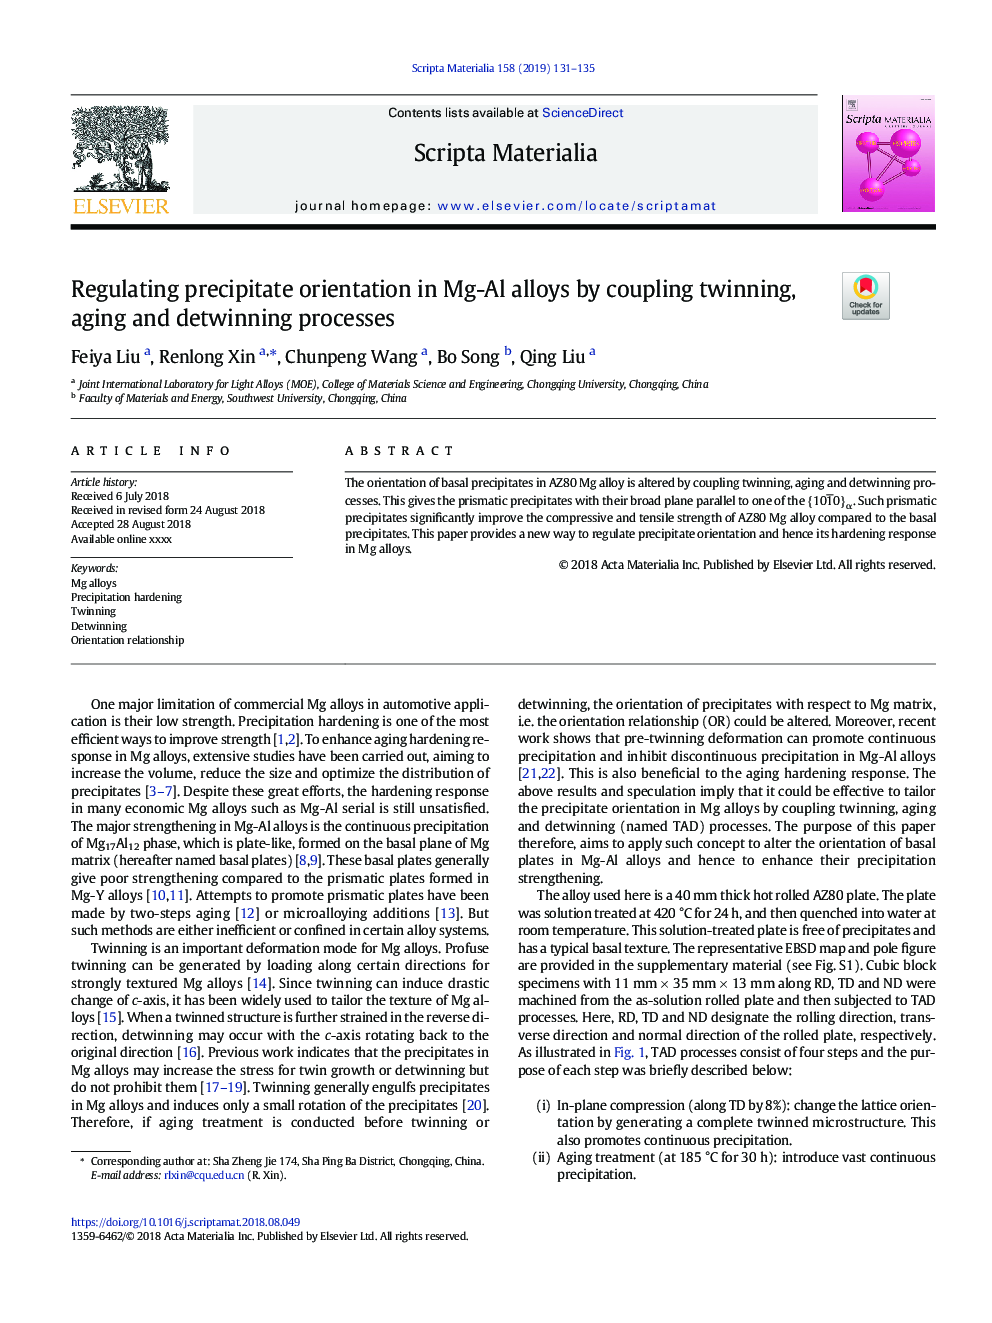 Regulating precipitate orientation in Mg-Al alloys by coupling twinning, aging and detwinning processes